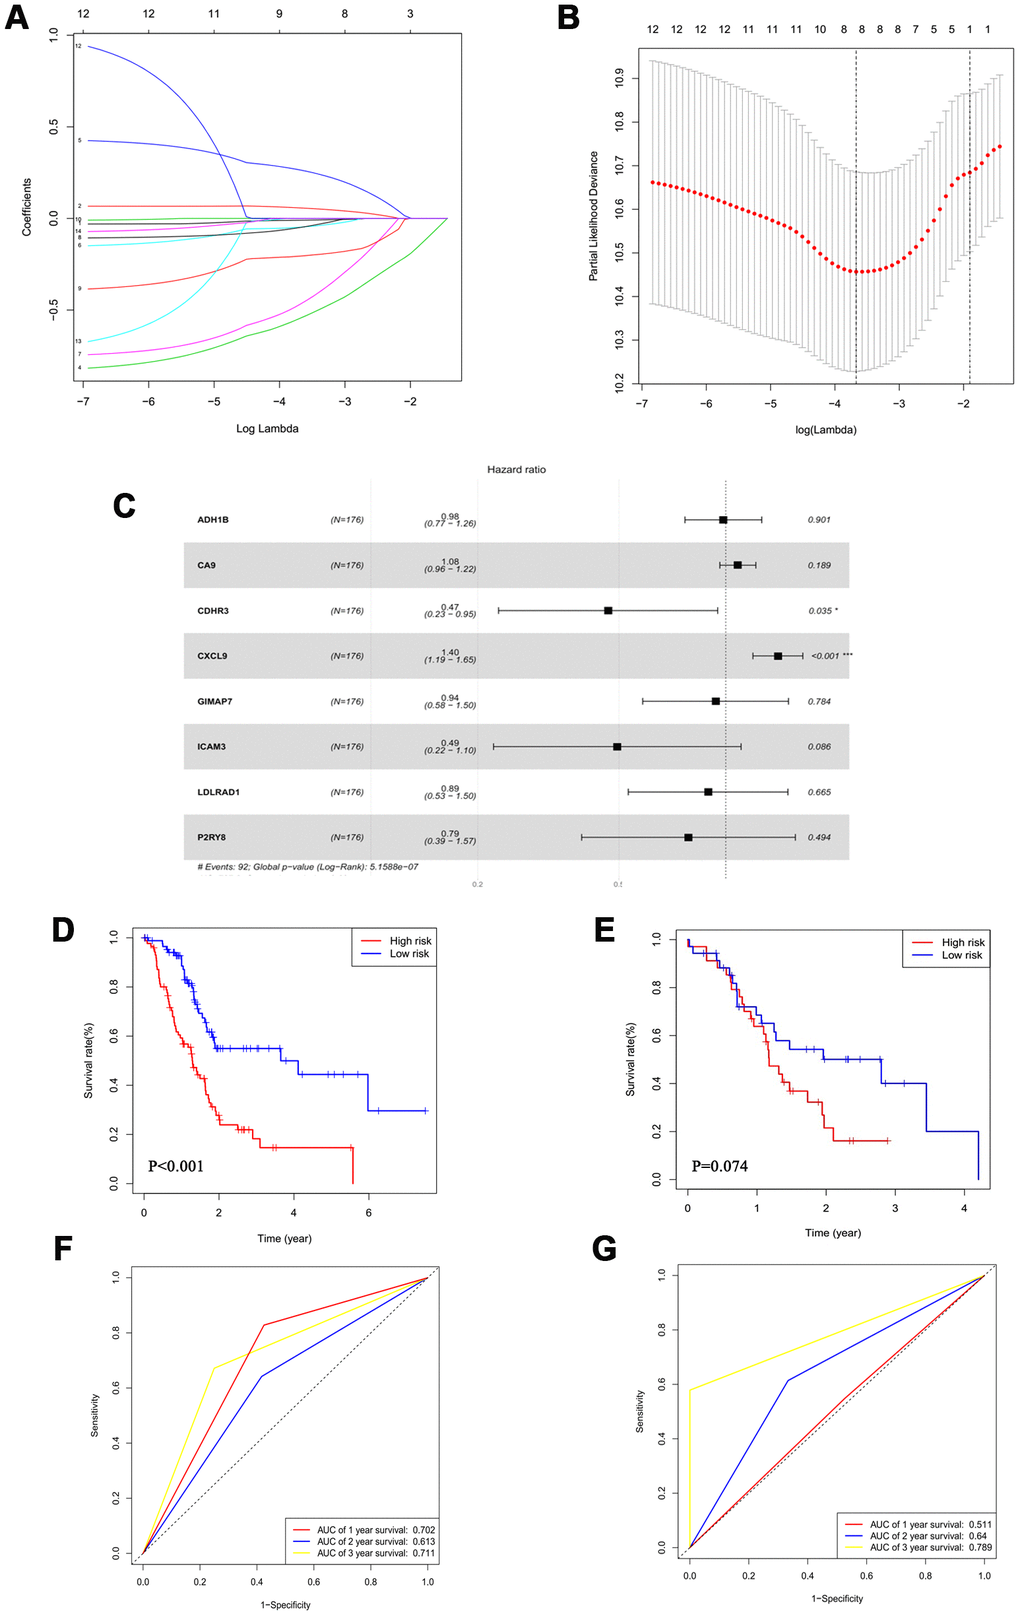 An 8-mRNA signature system was established to predict the overall survival of PAAD patients. (A) LASSO coefficient profiles of 14 mRNA with PB) 10-fold cross-validations result which identified optimal values of the penalty parameter λ. (C) The association between each gene and overall survival. (D, E) The Kaplan-Meier curves in the training set (D) and the validation set (E). (F, G) Time-dependent ROC analysis at 1, 2 and 3 years in the training set (F) and the validation set (G).